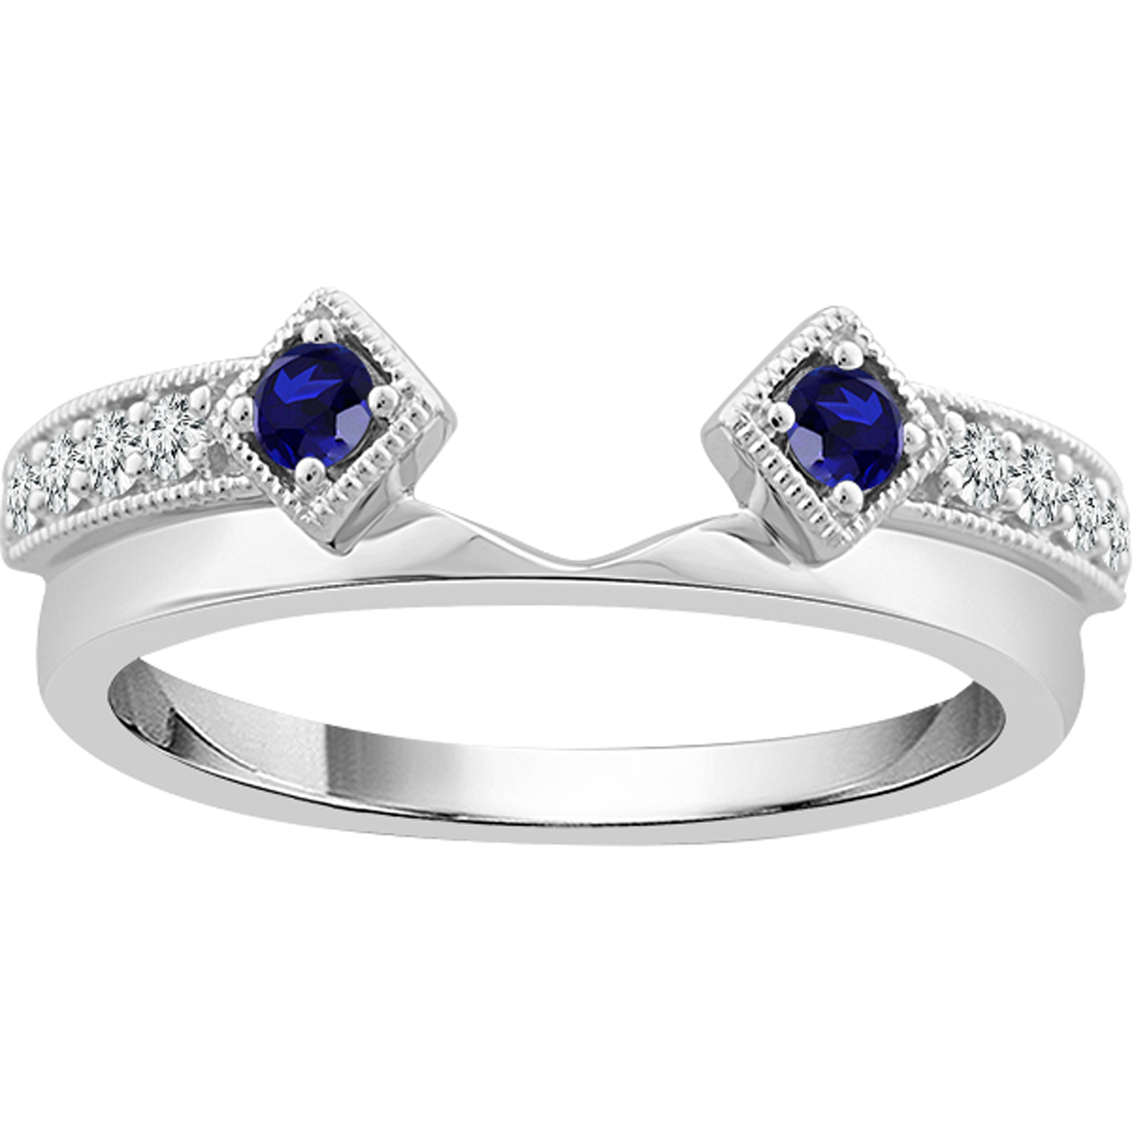 Traditions in Blue 10K 1/8 CTW Diamond and Sapphire Wedding Ring Enhancer Size 7